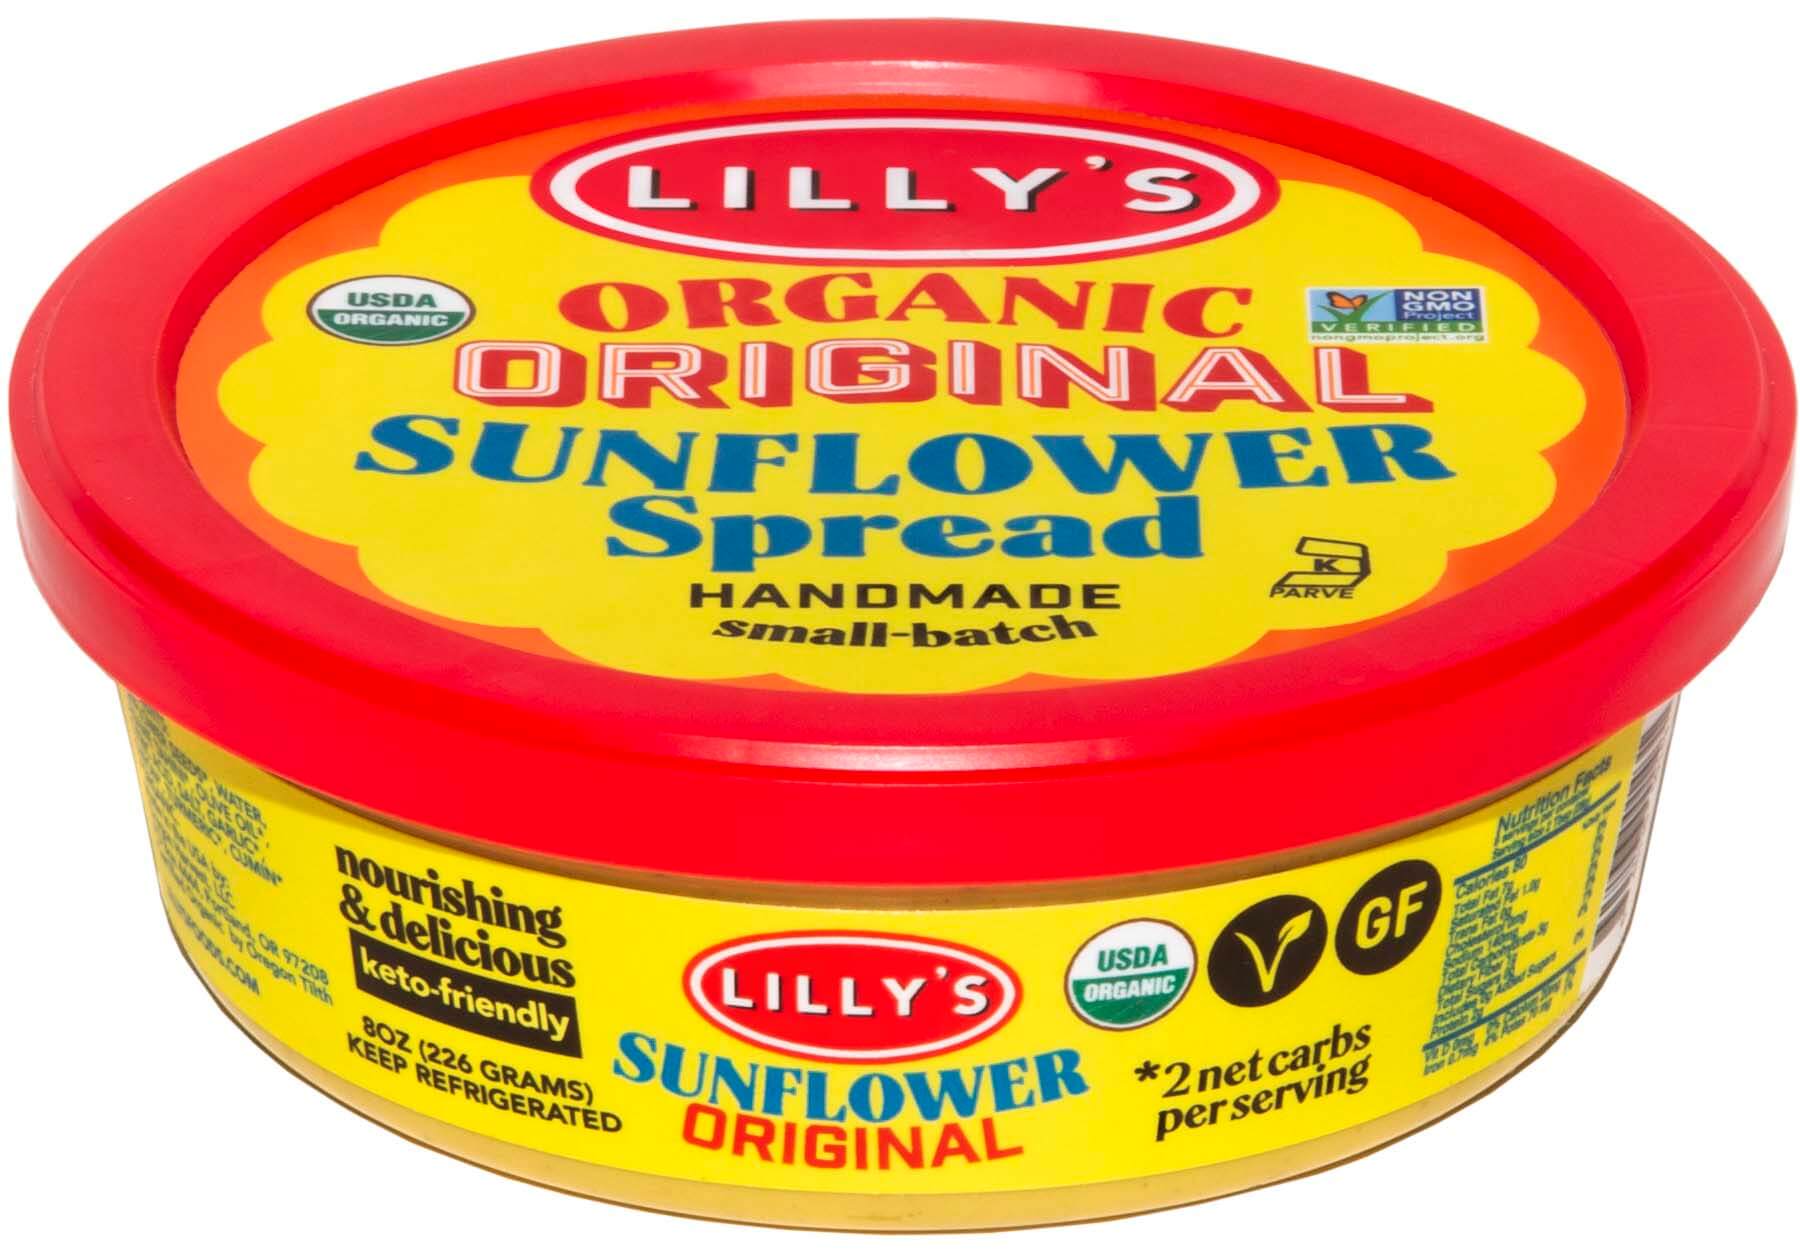 Lilly's Sunflower Spread